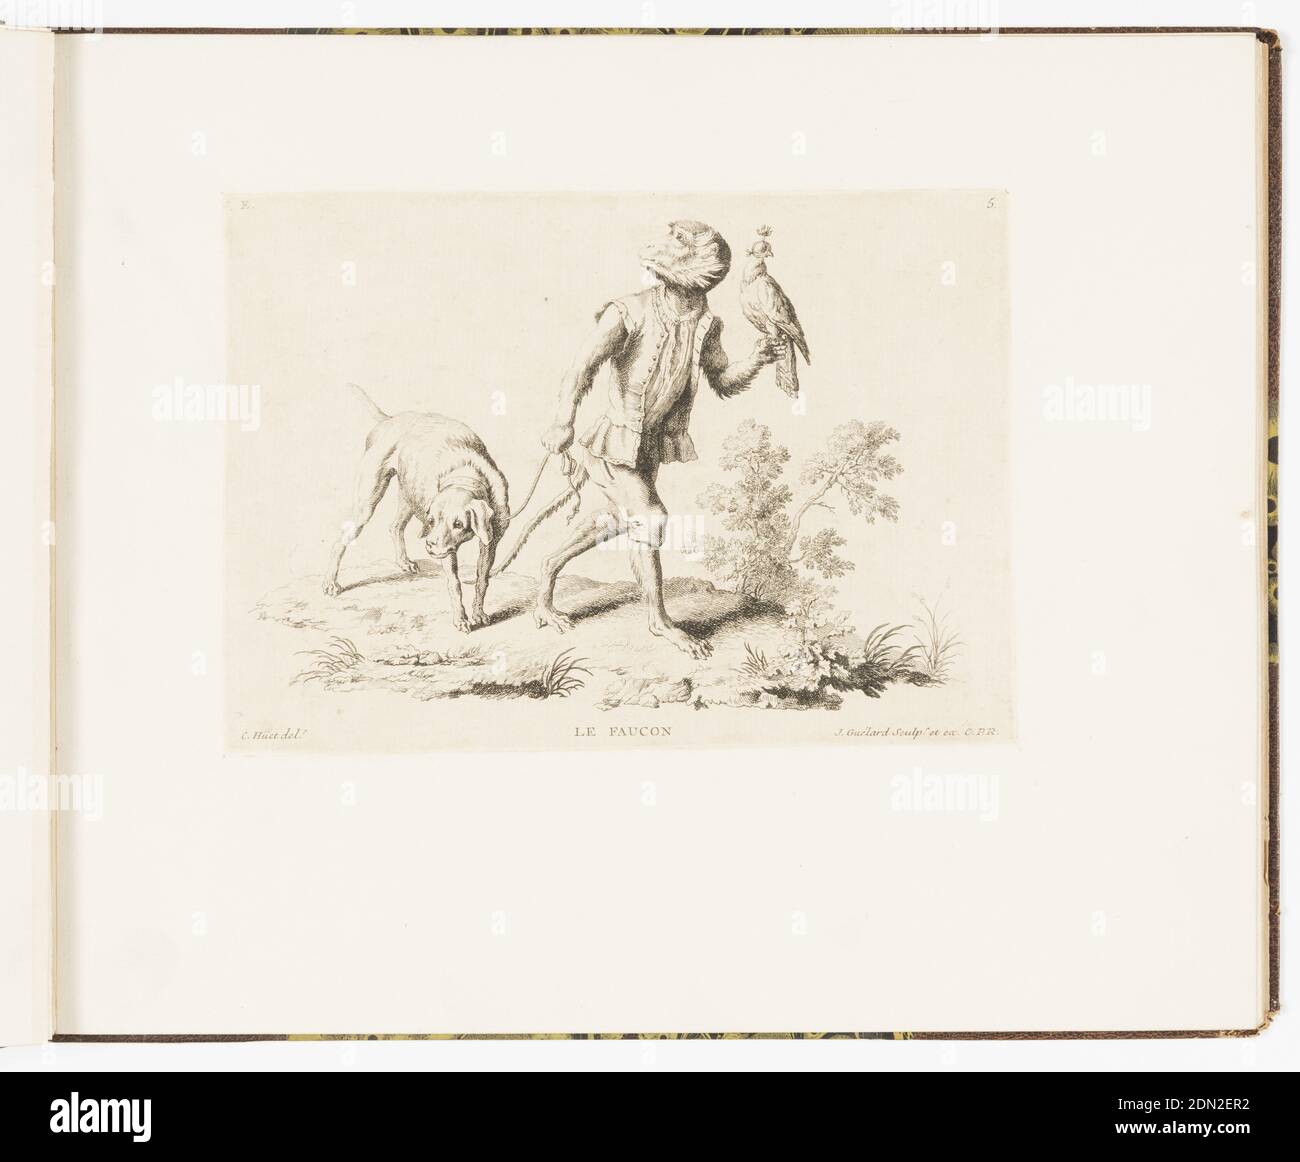 Plate 5, Le Faucon (The Falcon), Singeries ou différentes actions de la vie humaine représentées par des singes (Monkey Antics or Different Actions of Human Life Represented by Monkeys), Christophe Huet, French, 1700–1759, Jean-Baptiste-Antoine Guelard, French, 1719–ca. 1755, Charpentier, Paris, France, Etching on paper, Plate 5 of a series of 23 prints featuring monkeys acting as humans in various figural scenes. In an outdoor setting, a figure of a male monkey dressed as a gentleman hunter, wearing a waistcoat with buttons, tunic, and pants. He holds a falcon wearing blinders Stock Photo